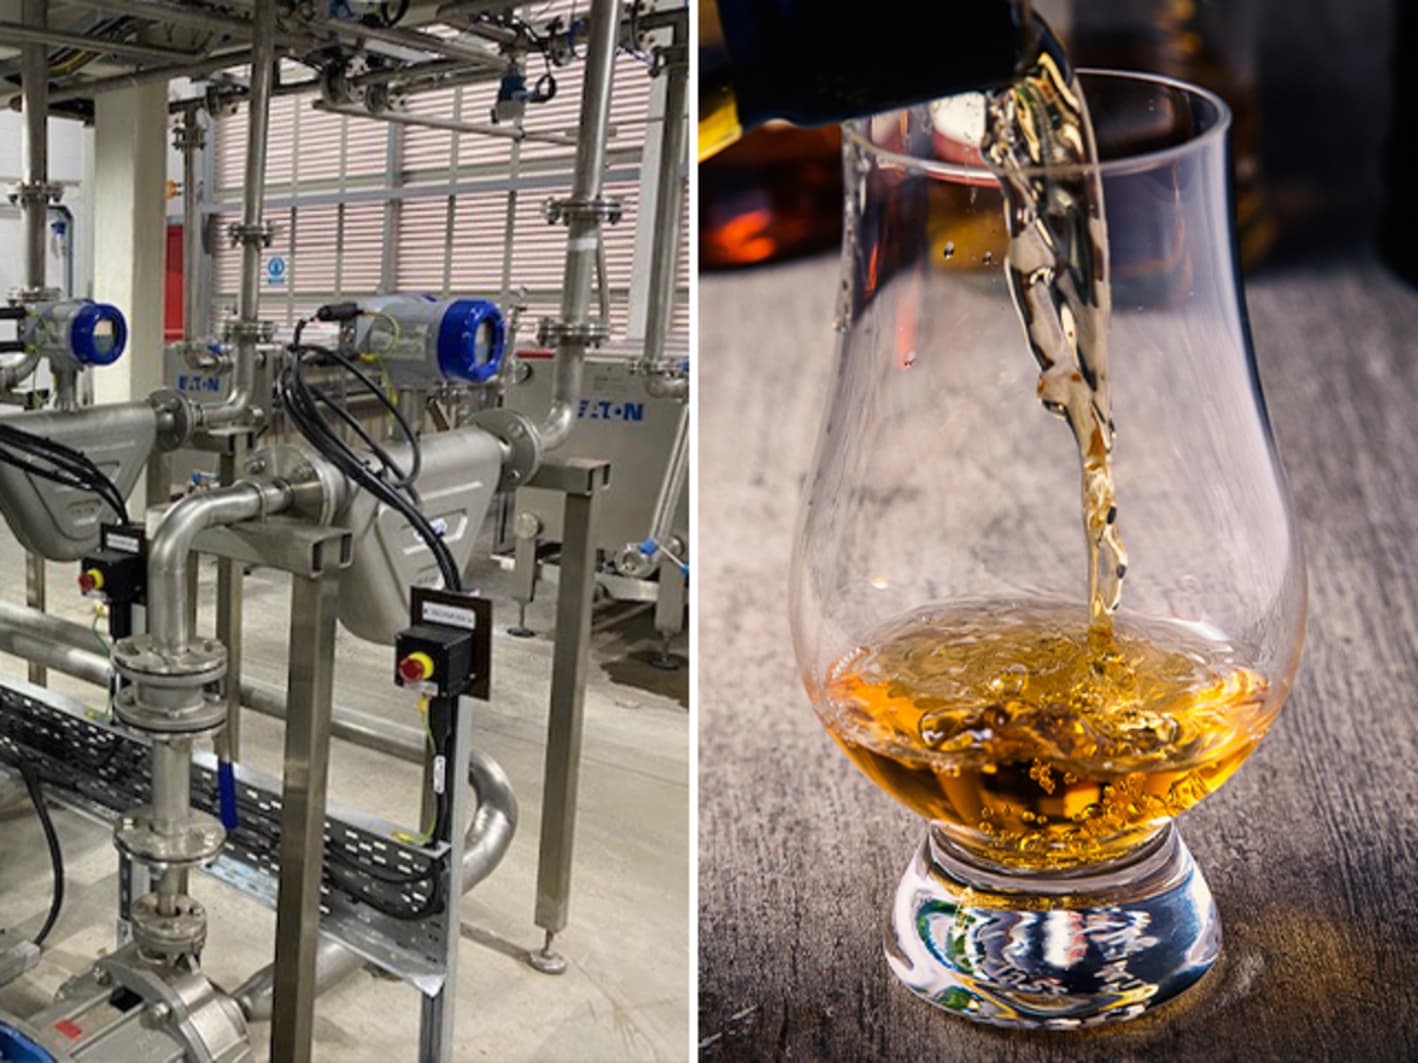 https://dam.krohne.com/image/upload/c_scale,w_540/q_auto/dpr_2.625/d_im-other:image-not-available.png/f_auto/v1/im-photo-composition/volume-flow-alcohol-concentration-measurement-whisky-bottling-plant?_a=ATAPpAA0